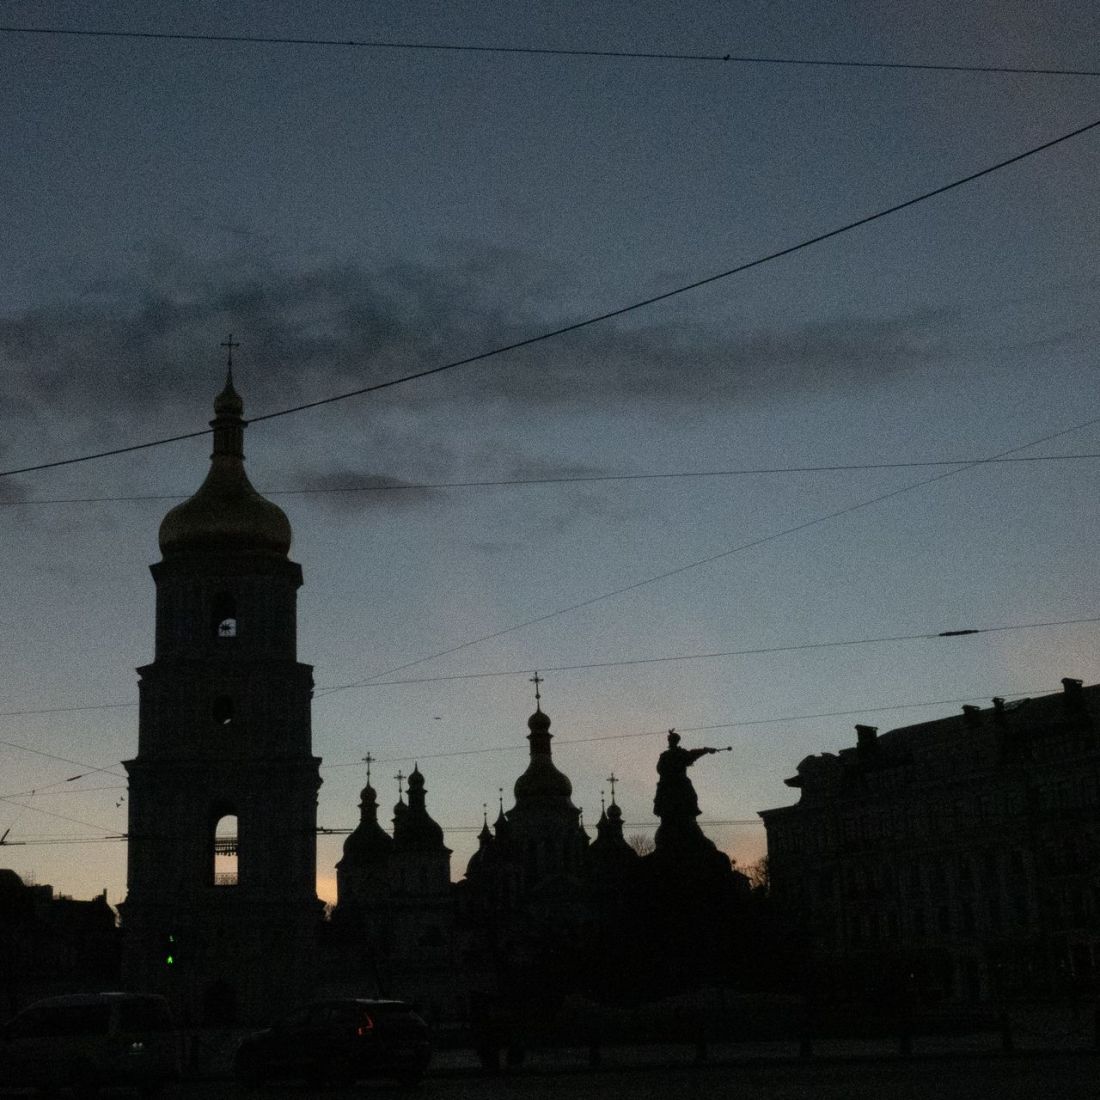 the city of kyiv at dusk with no lights